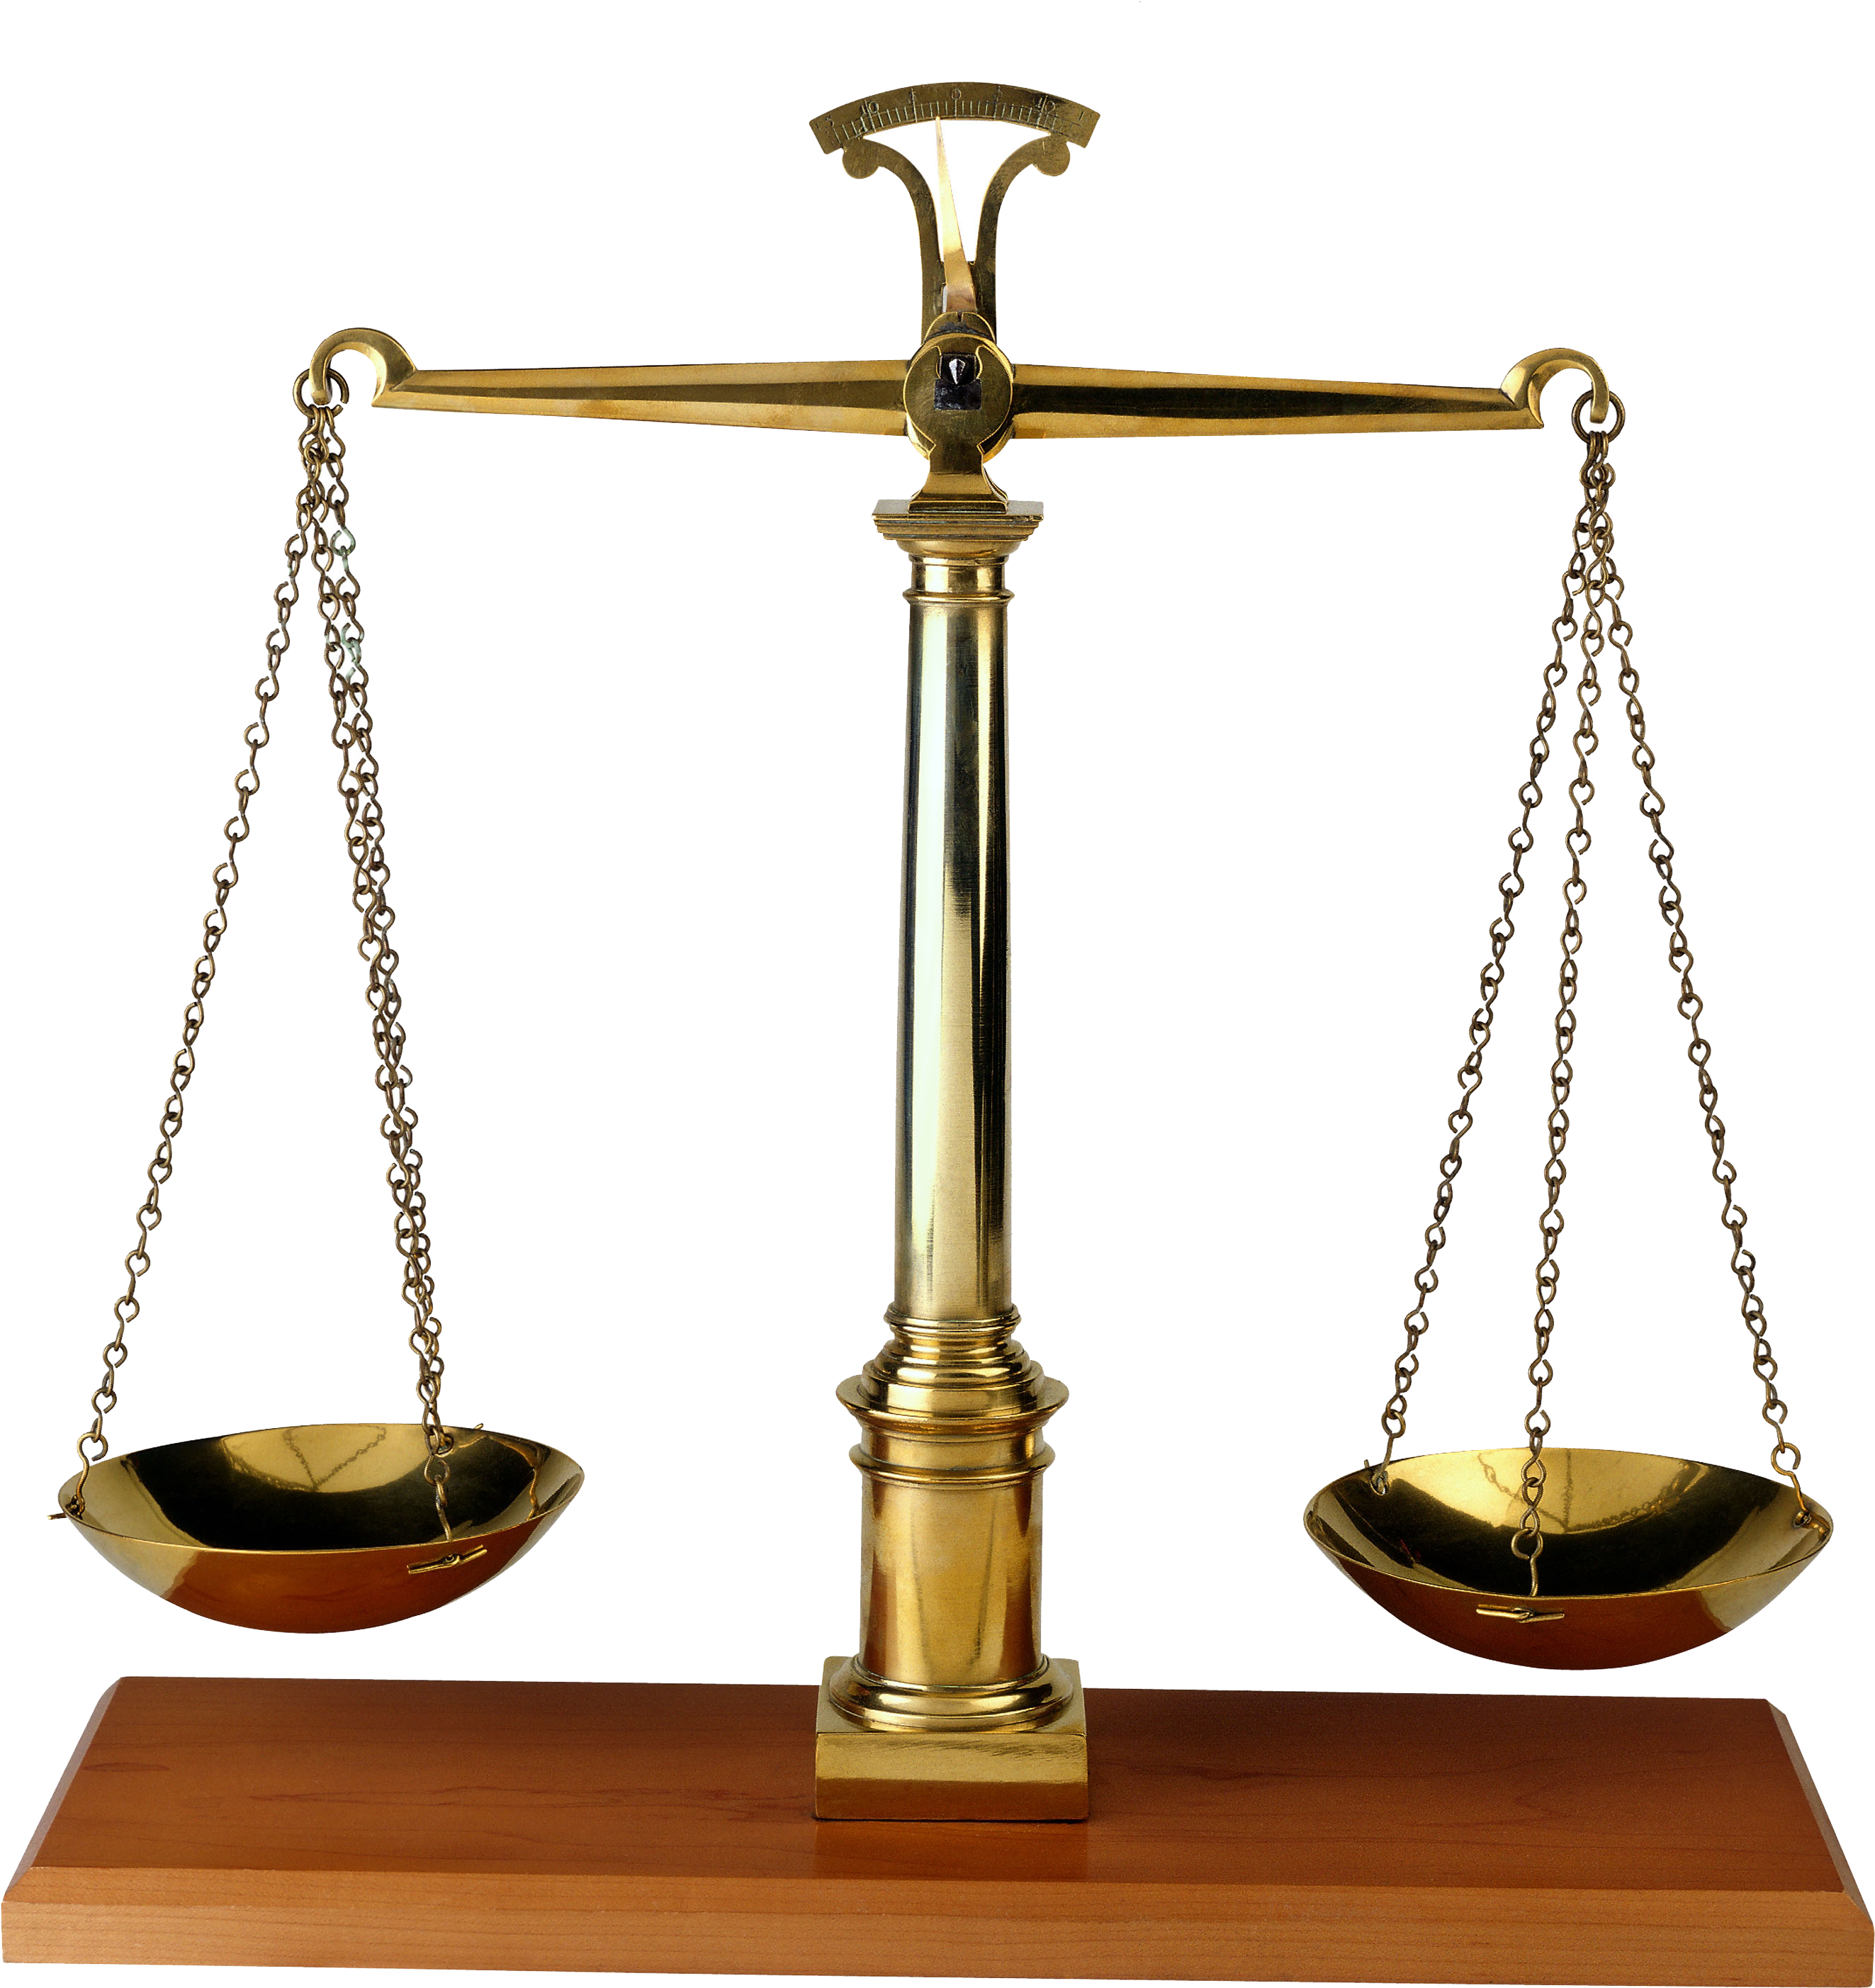 Scales Image Wfx5xb Clipart - Constitutional Values (3250x3225)